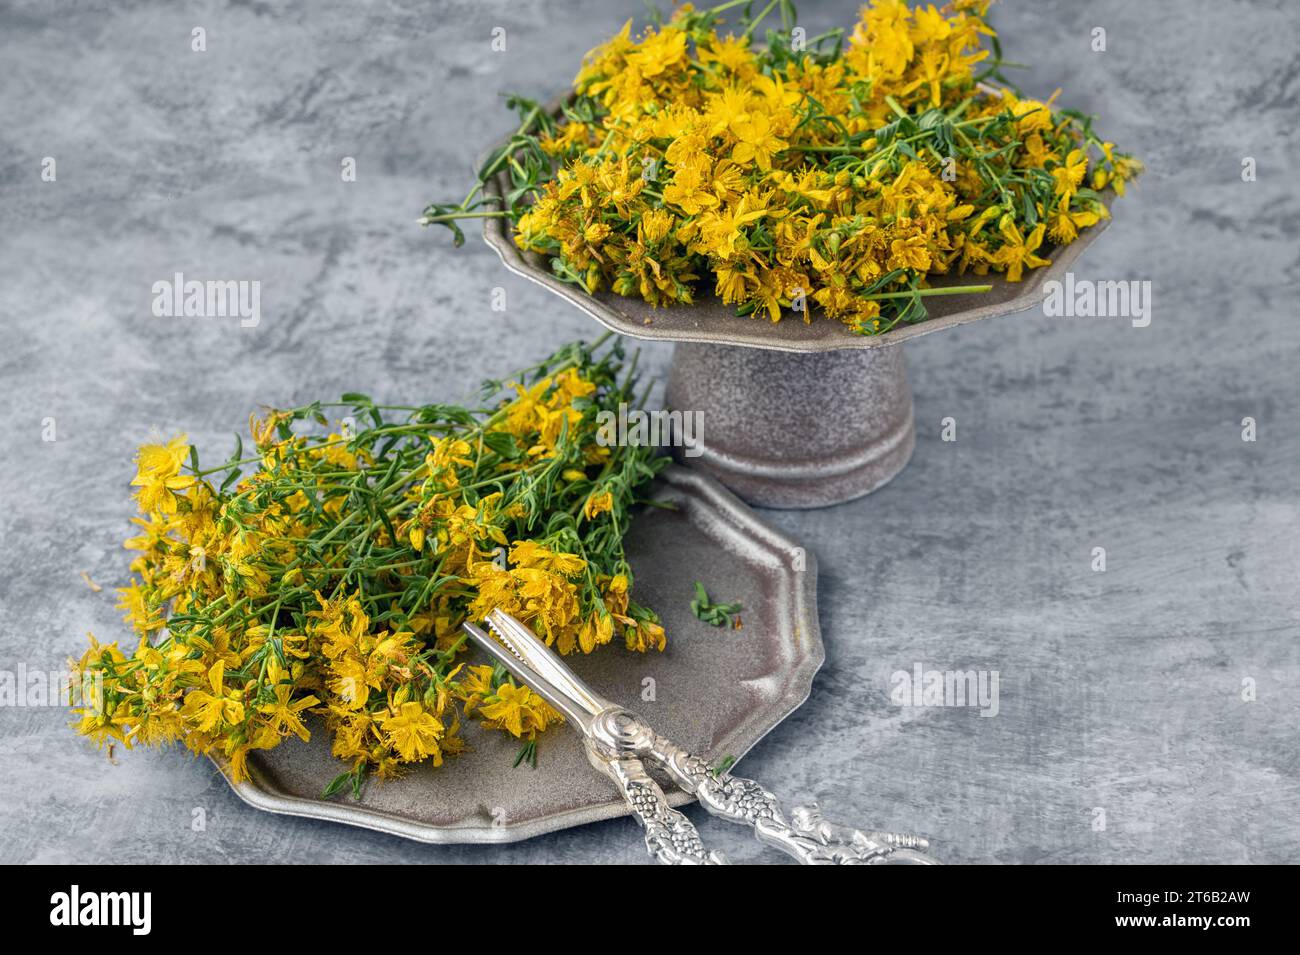 medicinal herb St. John's wort is prepared for drying. twigs and dried flowers of St. John's wort lie on a metal tray with handles and beautiful antiq Stock Photo